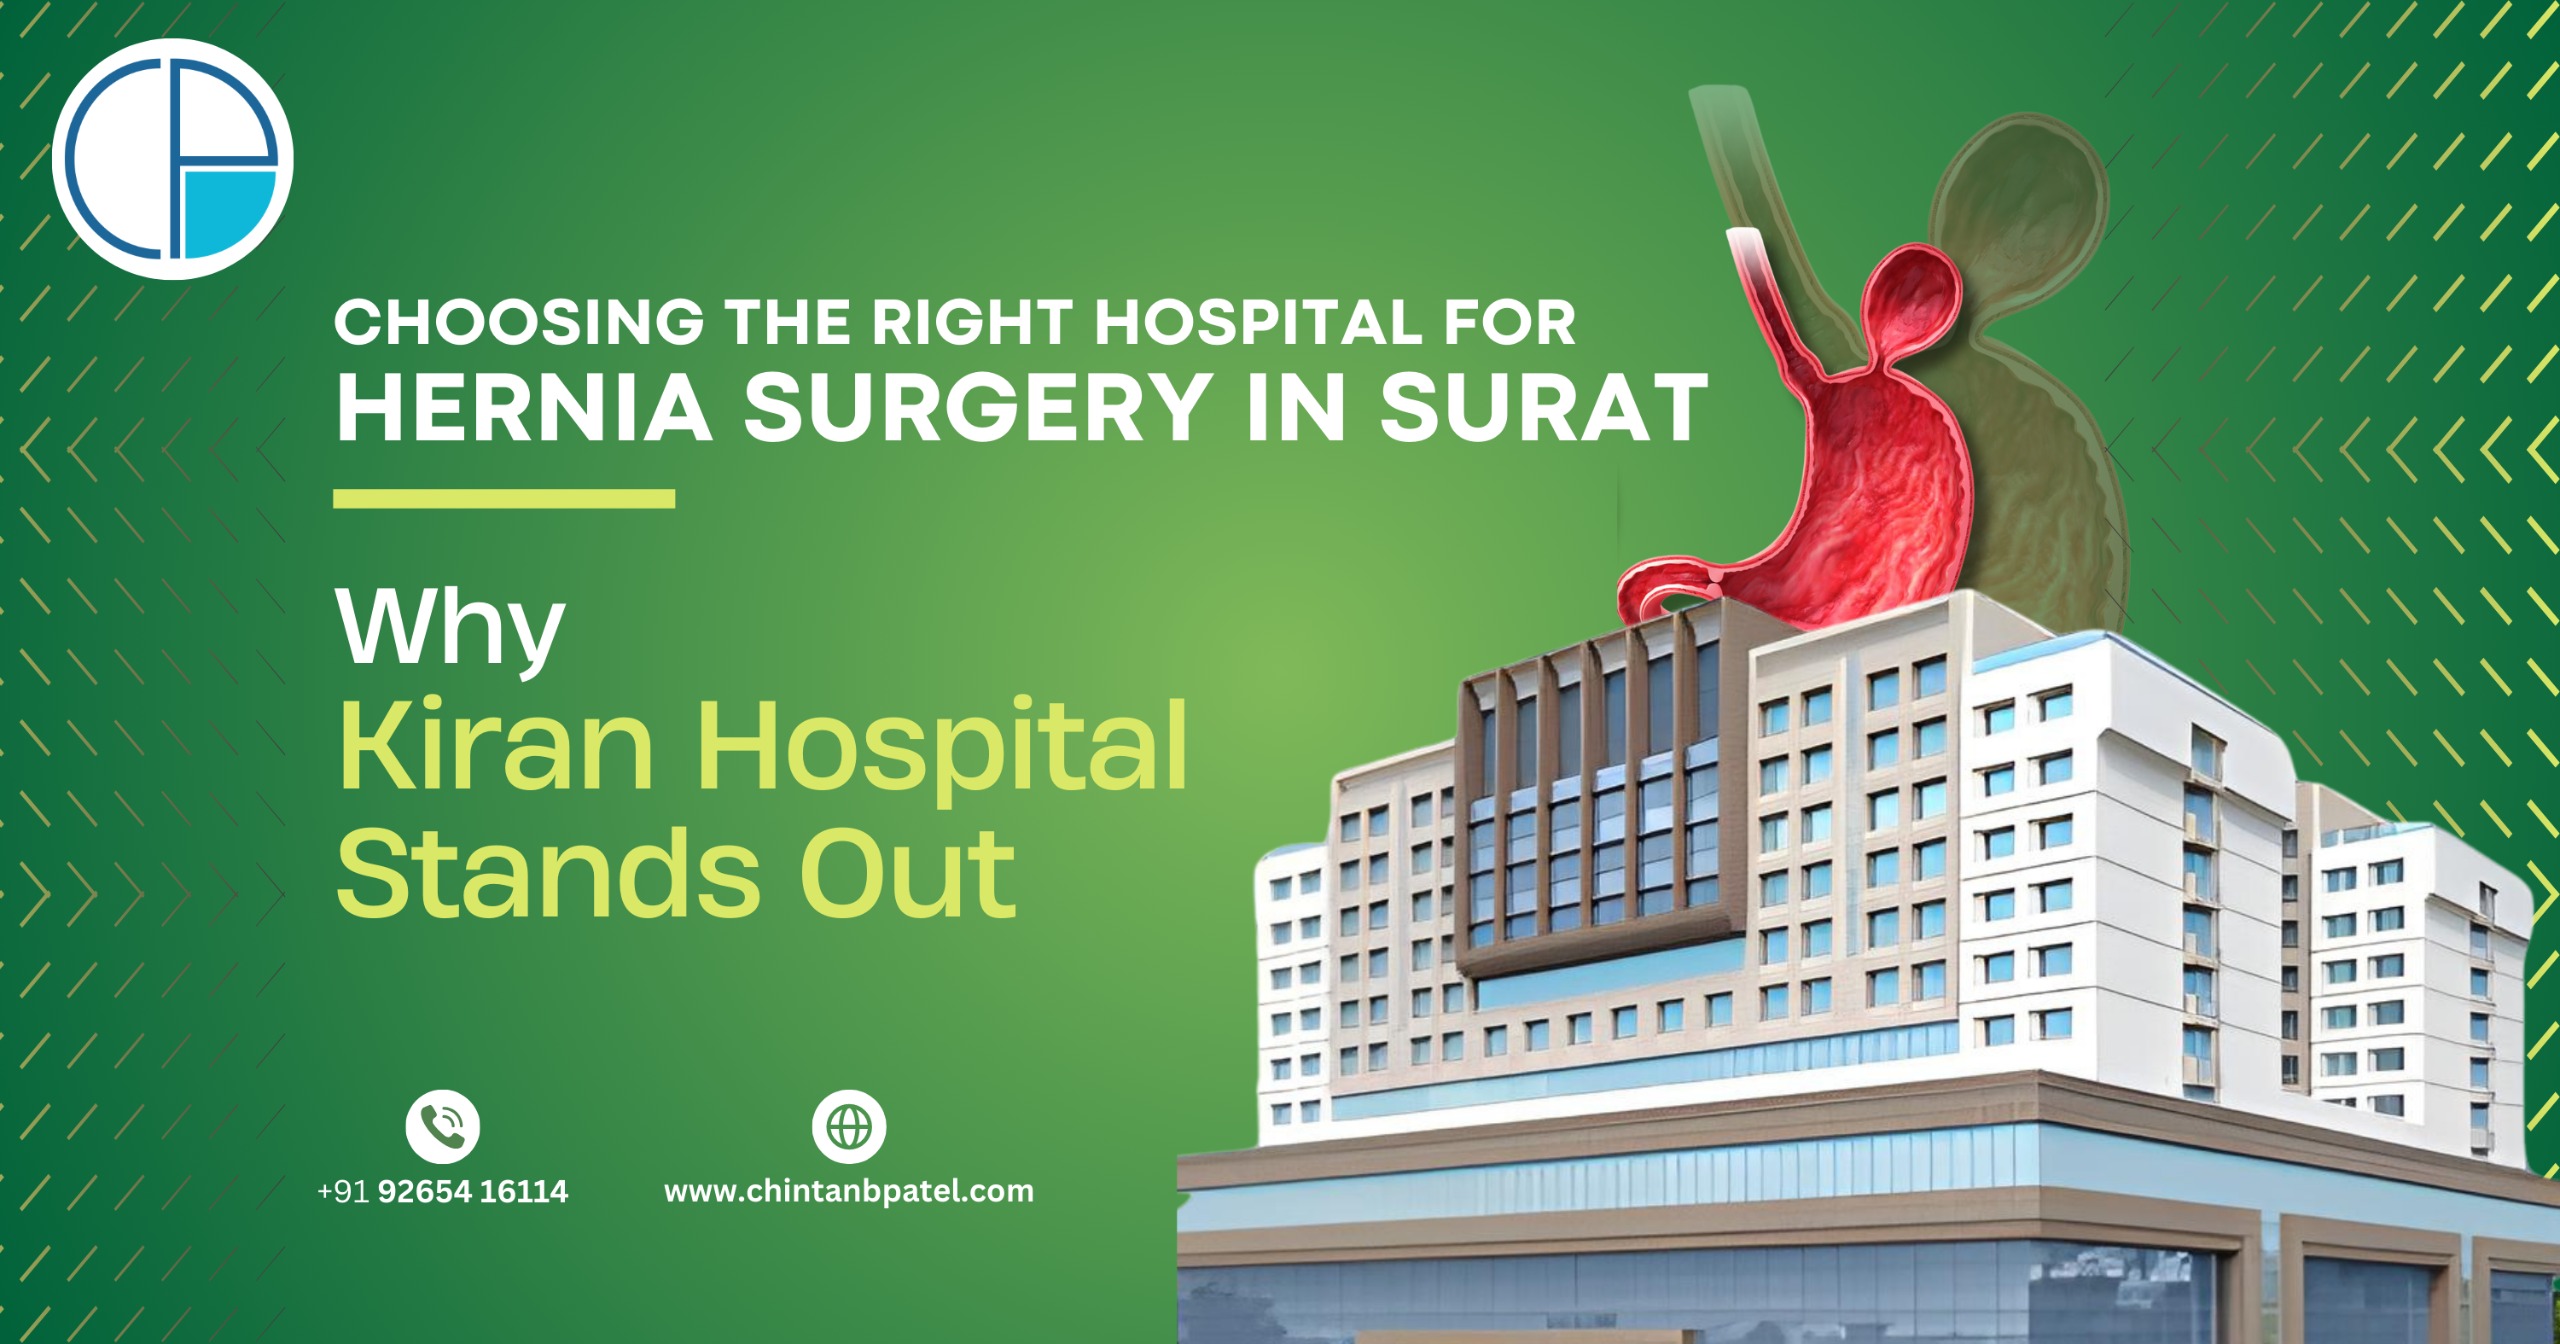 Choosing the Right Hospital for Hernia Surgery in Surat: Why Kiran Hospital Stands Out